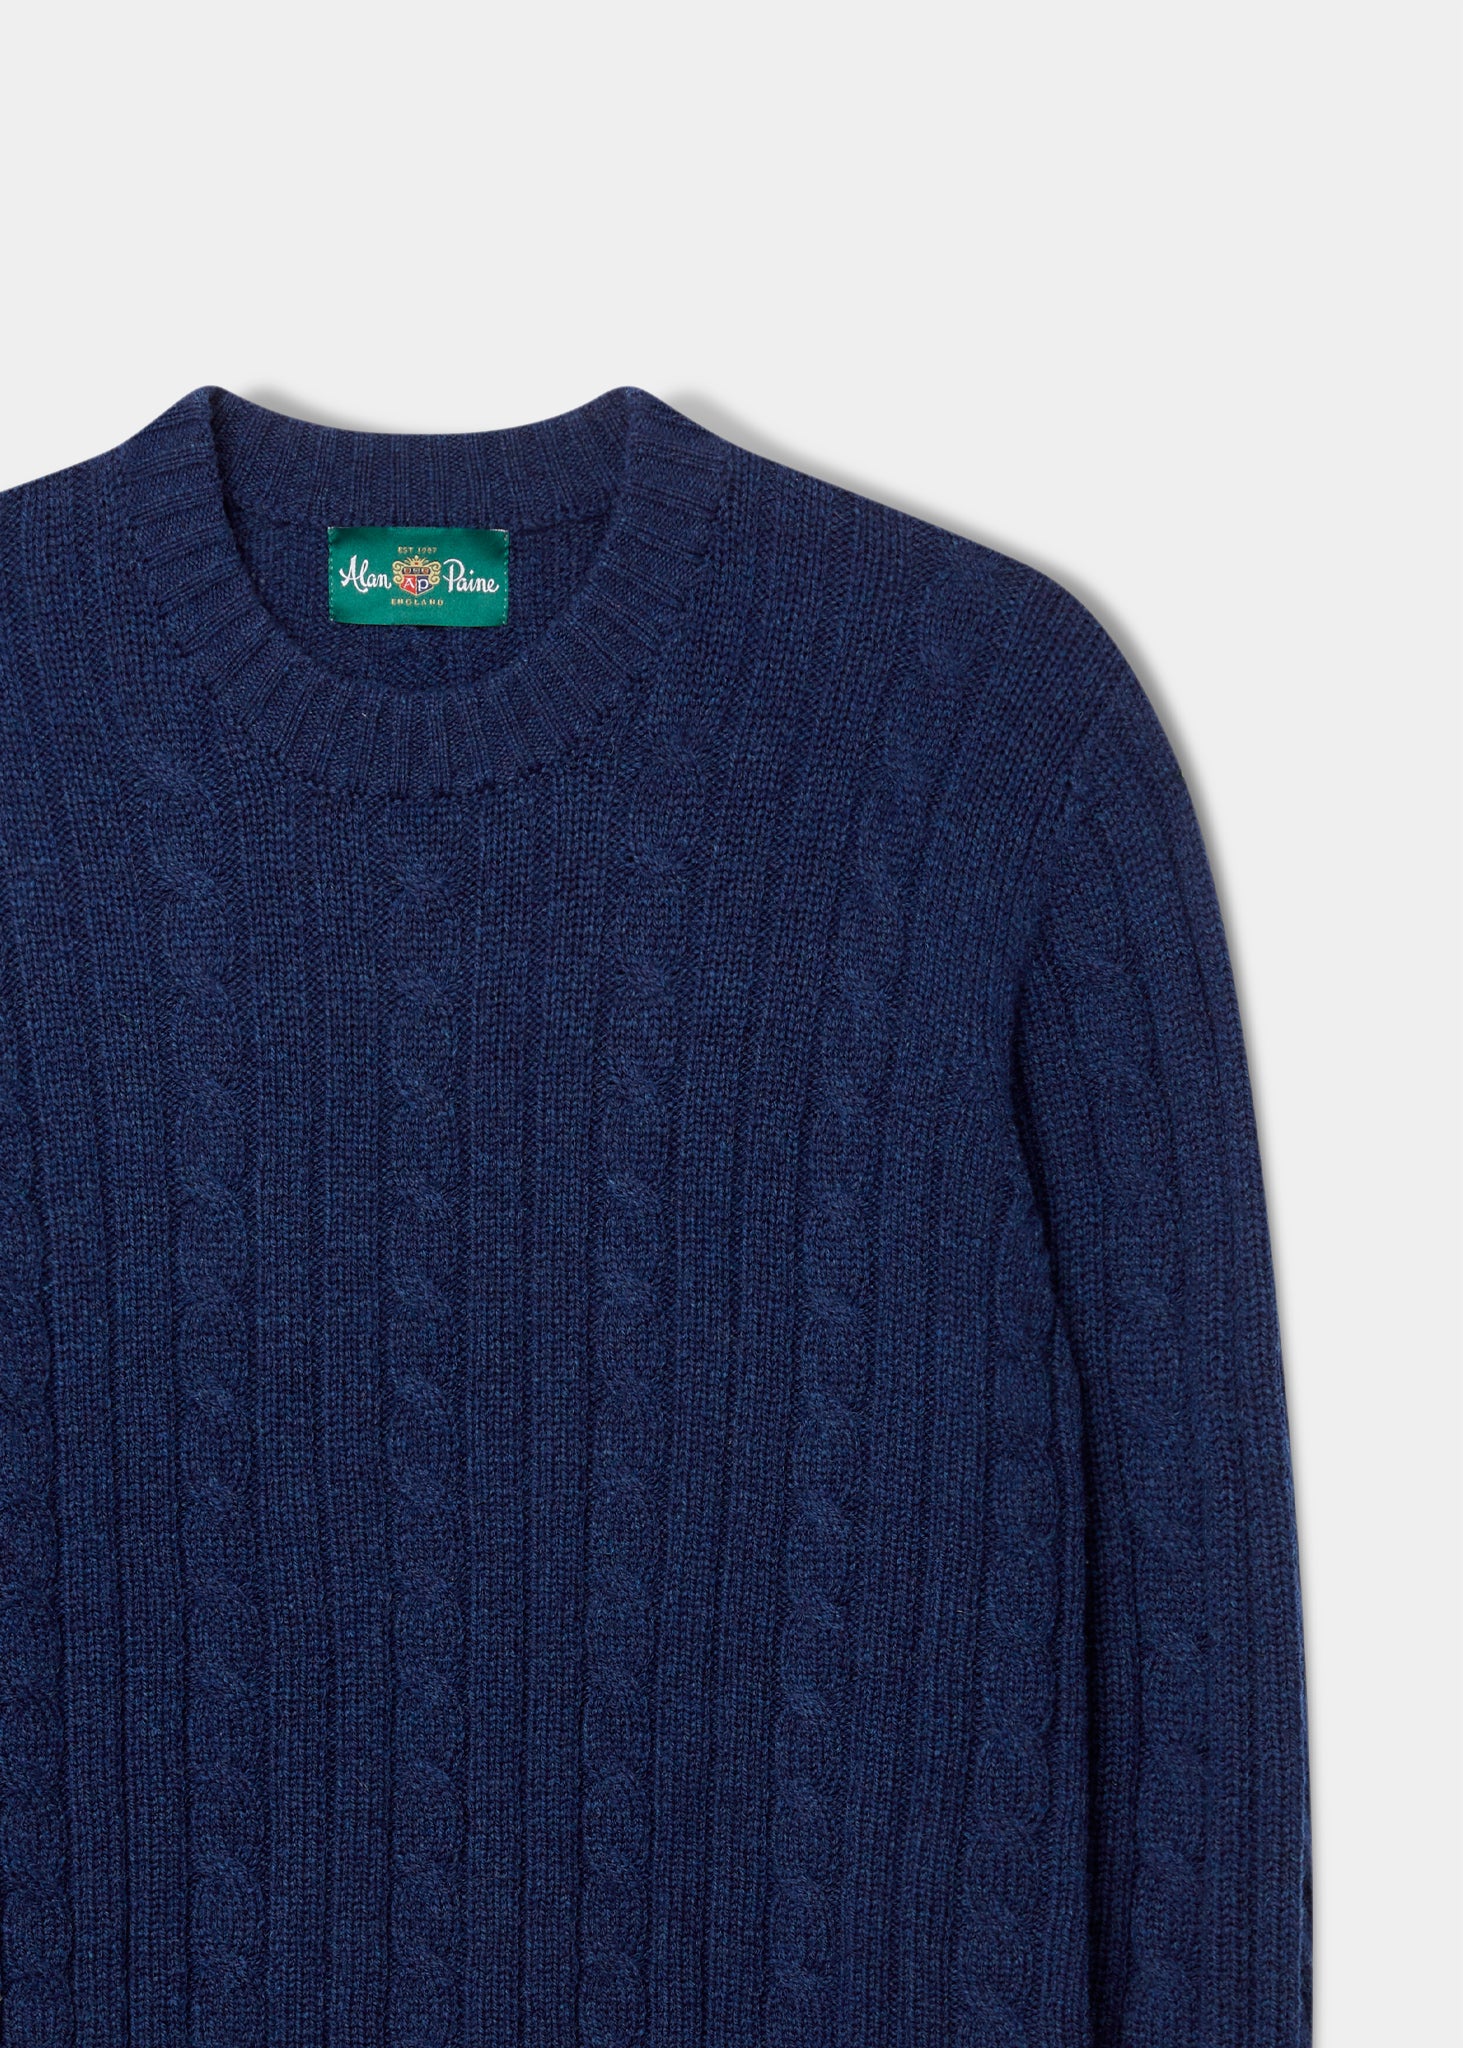 Men's Lambswool Cable Knit Jumper in Indigo – Alan Paine UK